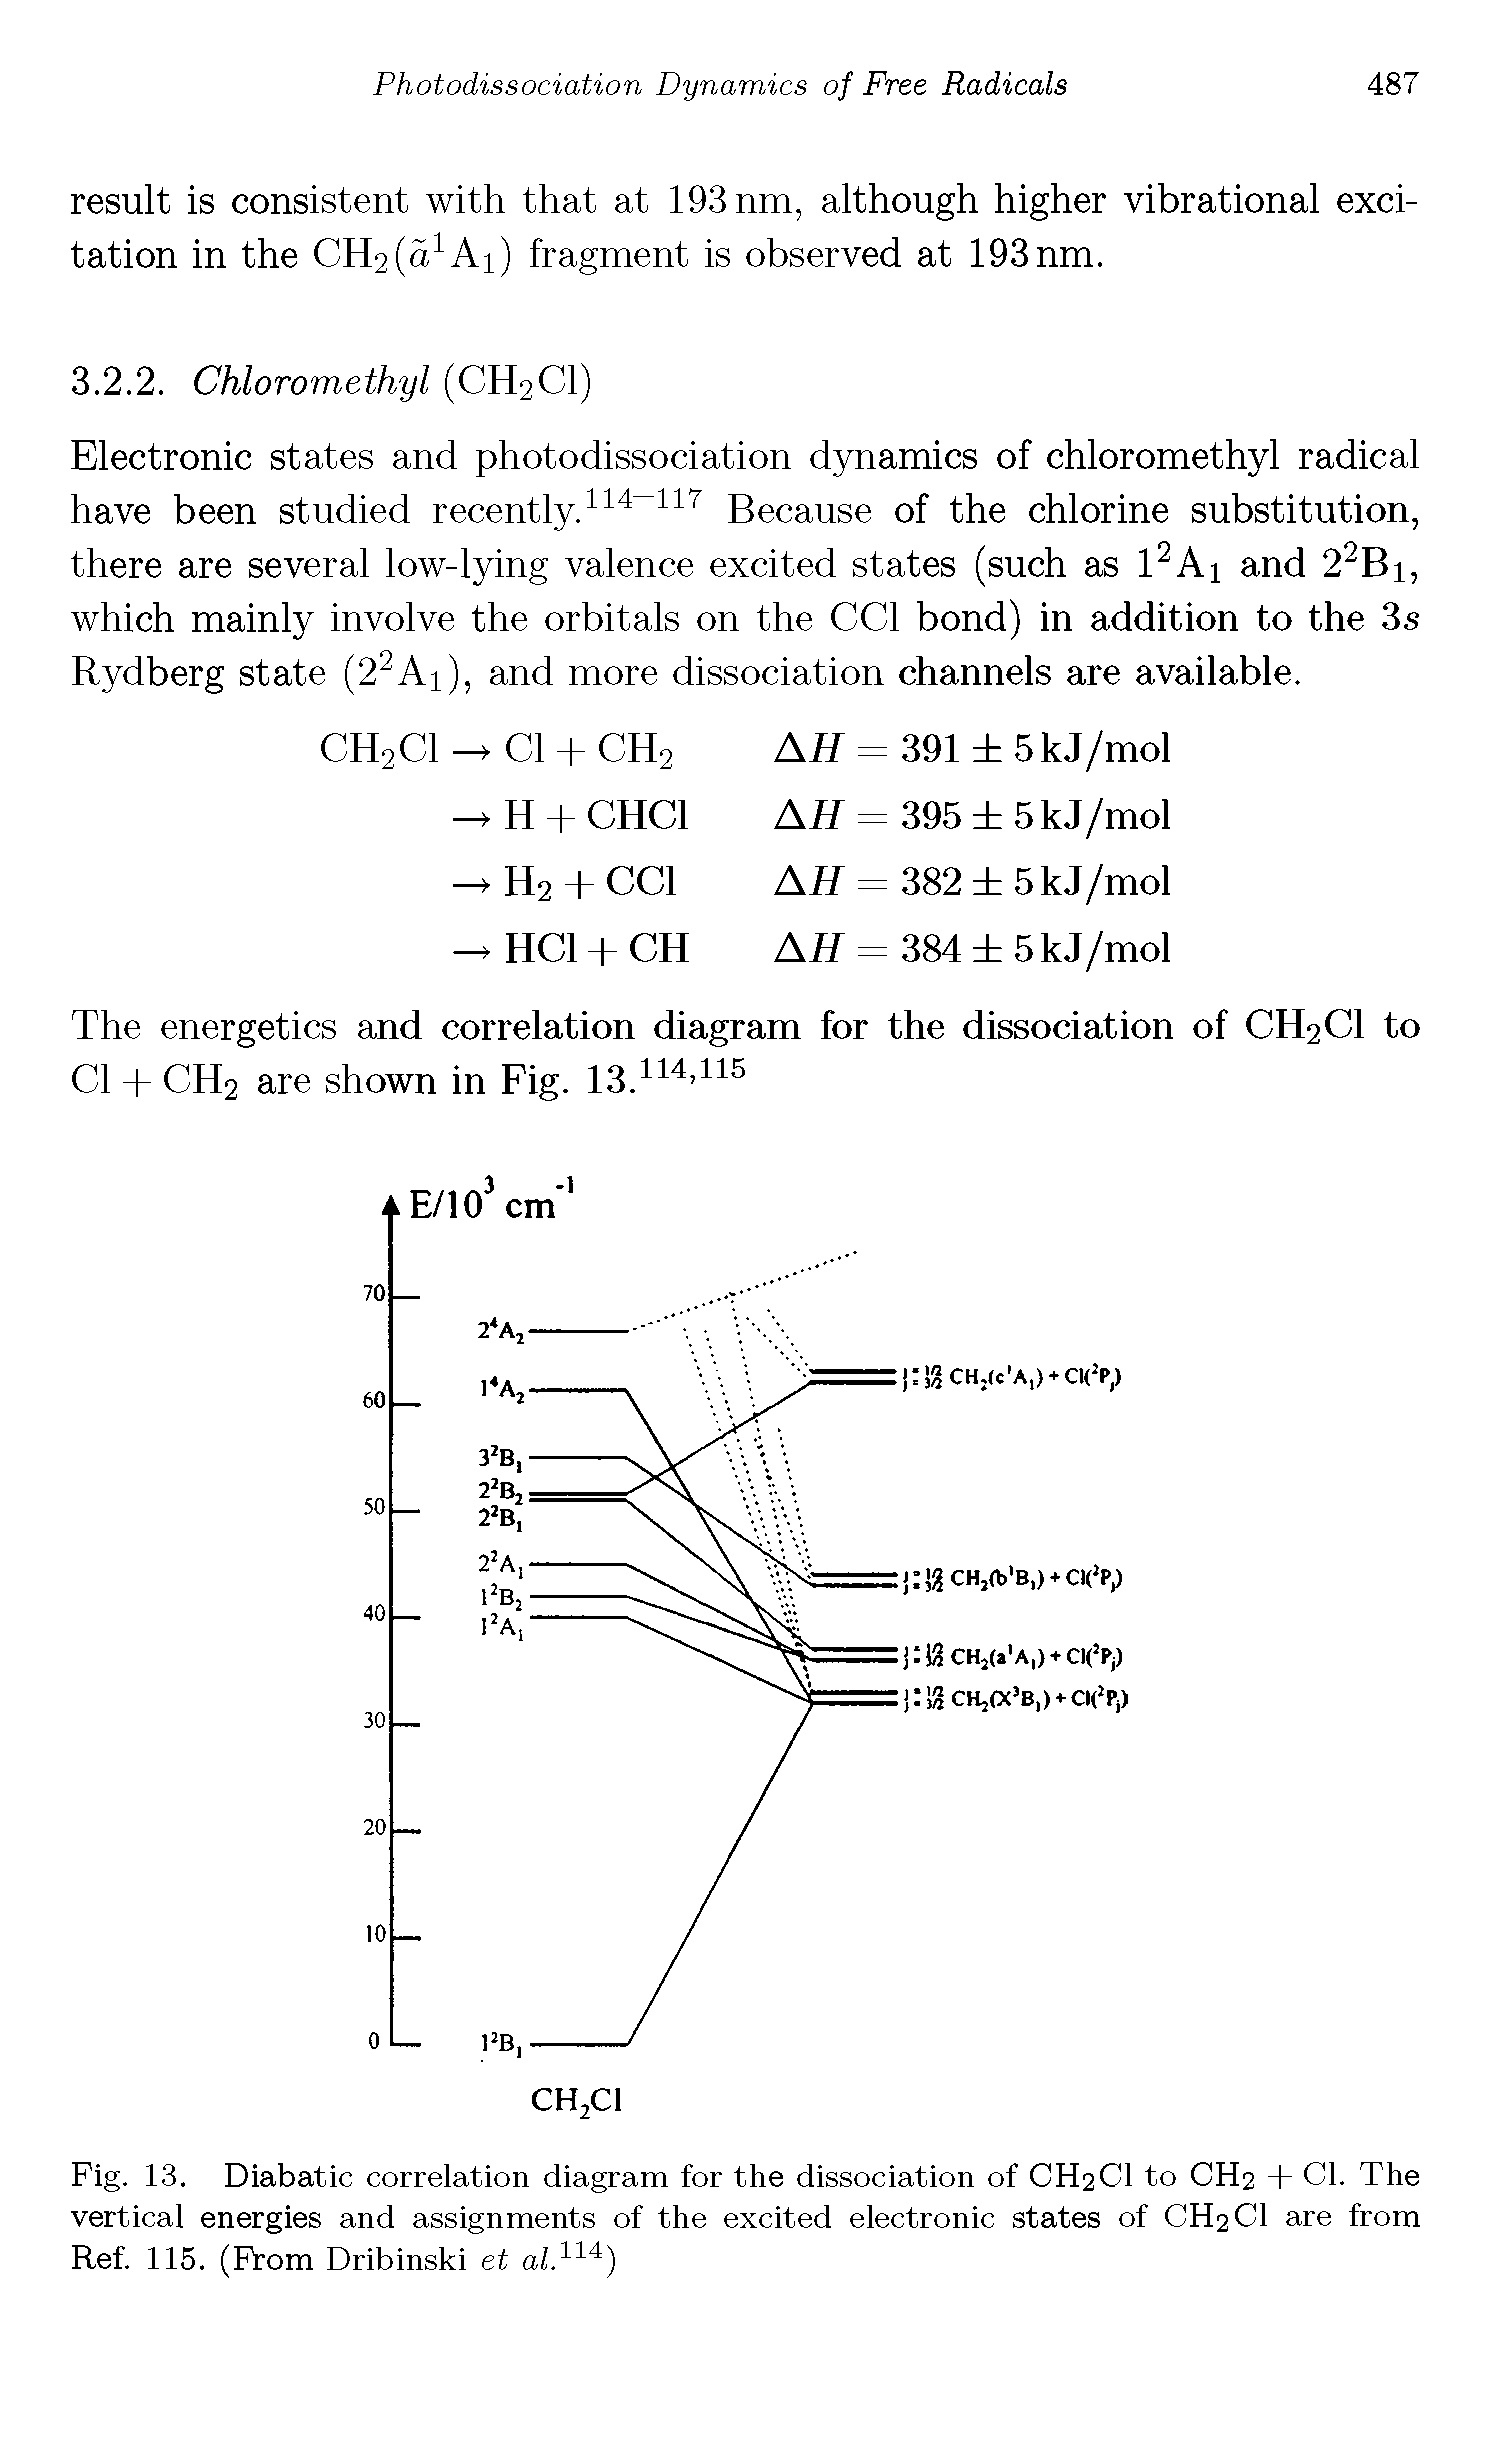 Fig. 13. Diabatic correlation diagram for the dissociation of CH2CI to CH2 + Cl. The vertical energies and assignments of the excited electronic states of CH2CI are from Ref. 115. (From Dribinski et al.11A)...